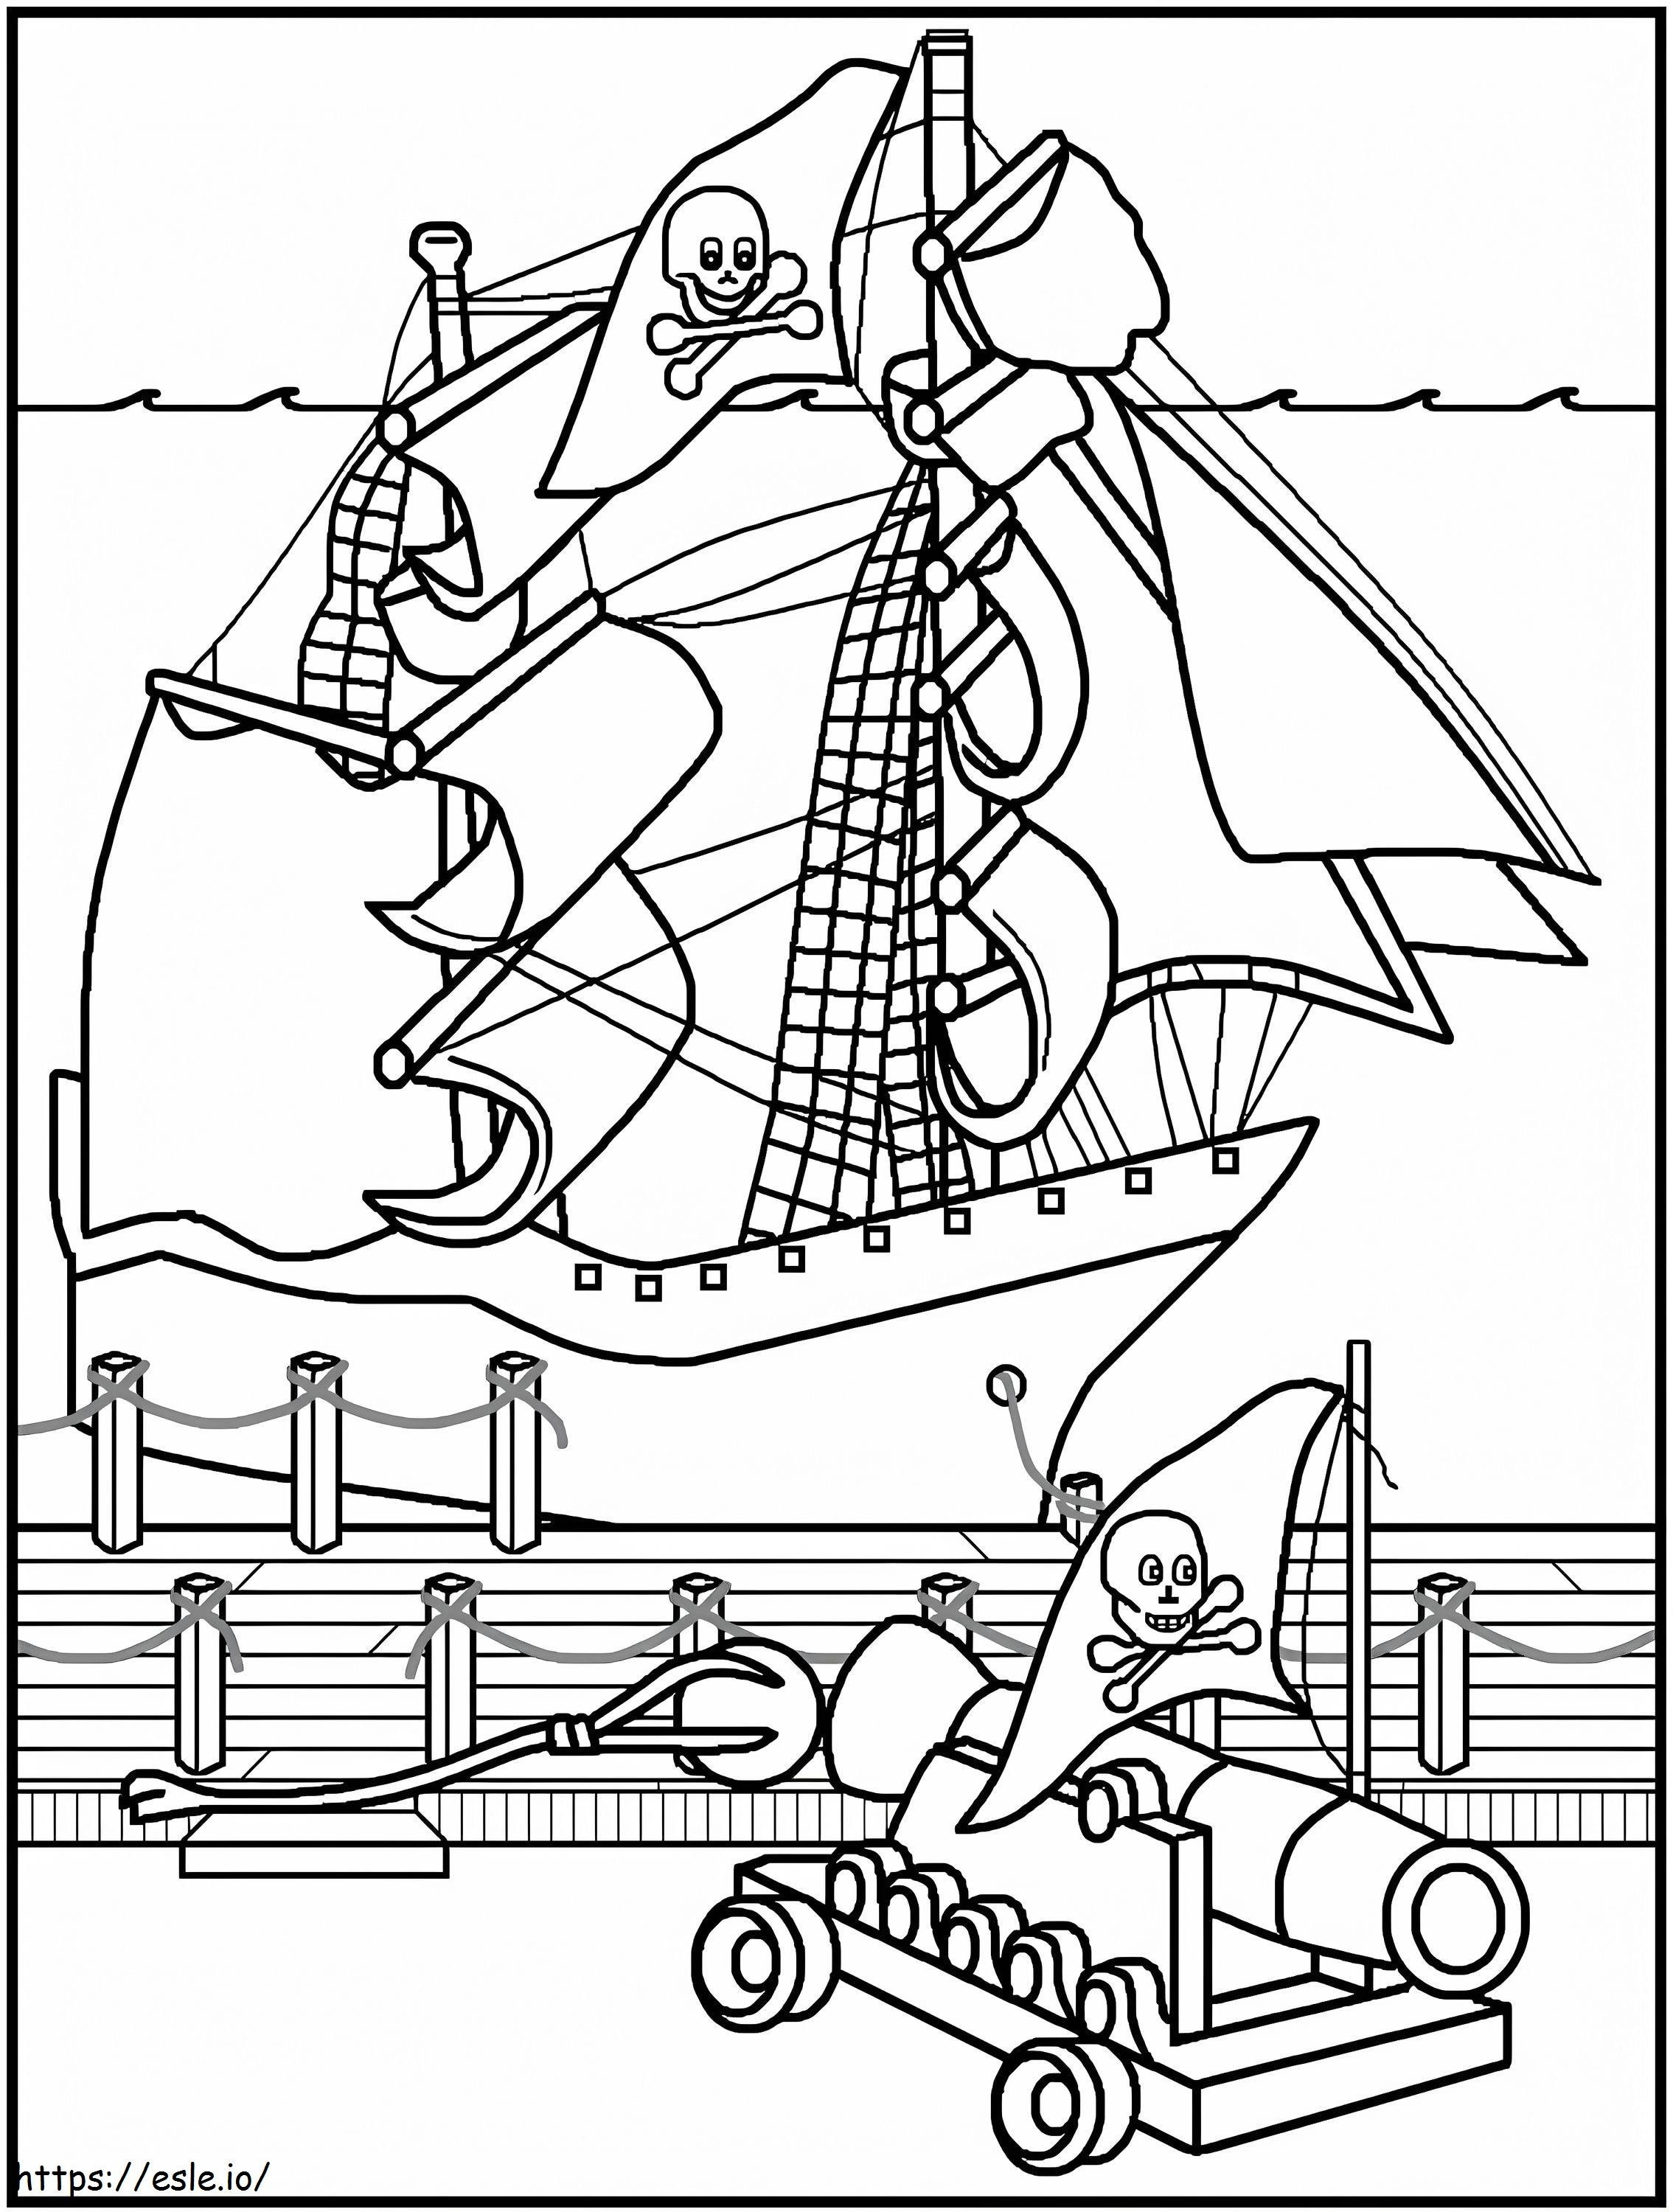 Pirate Ship Coloring Page 1 coloring page